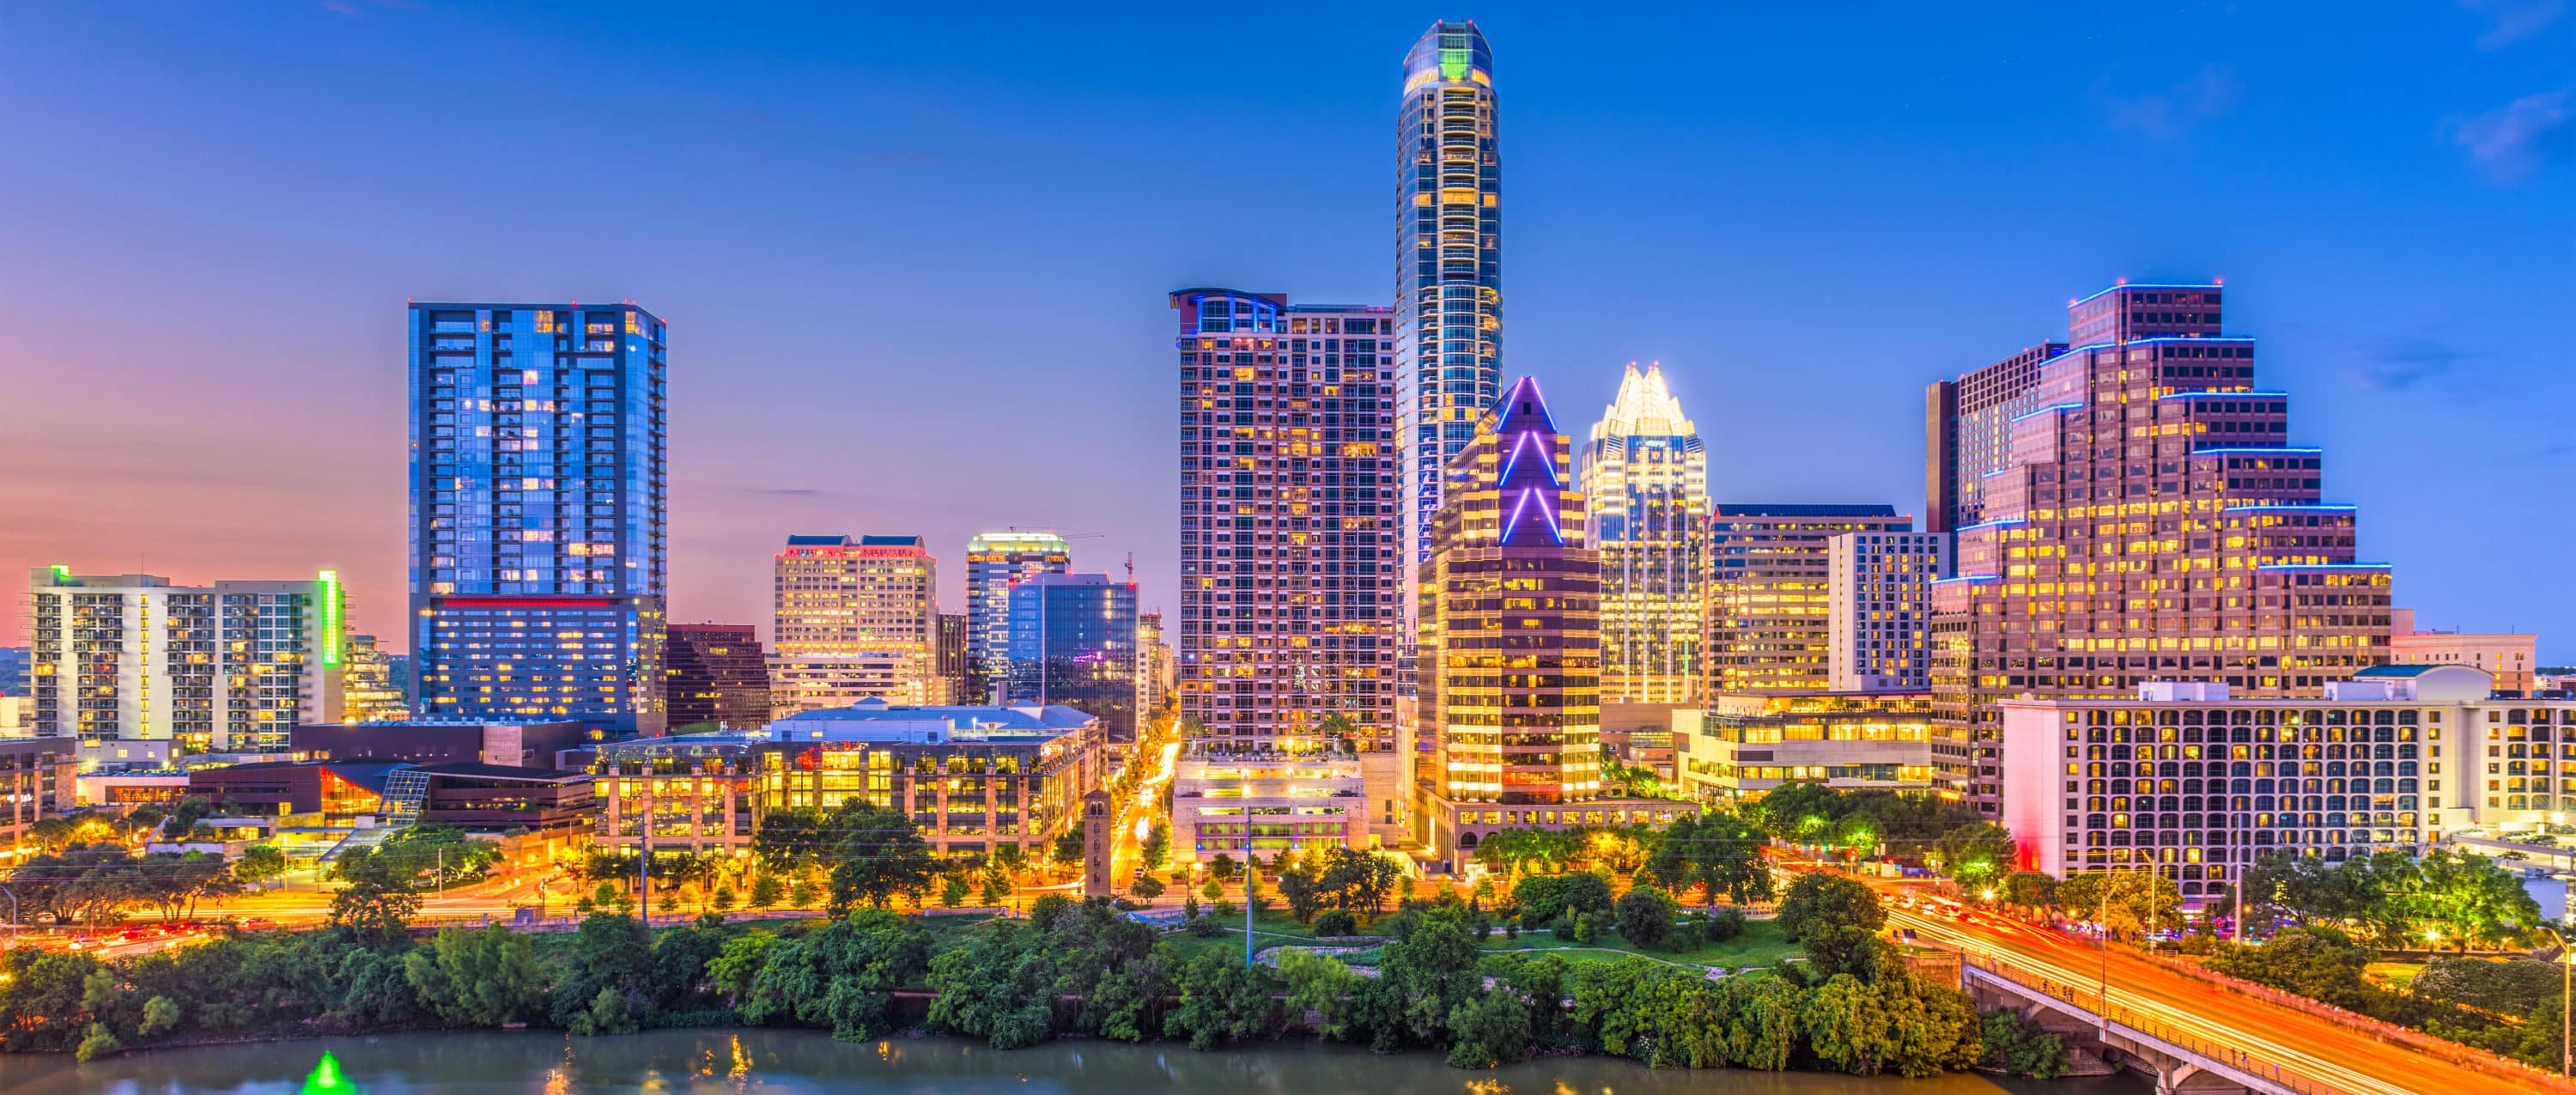 10-most-affordable-office-buildings-in-downtown-austin